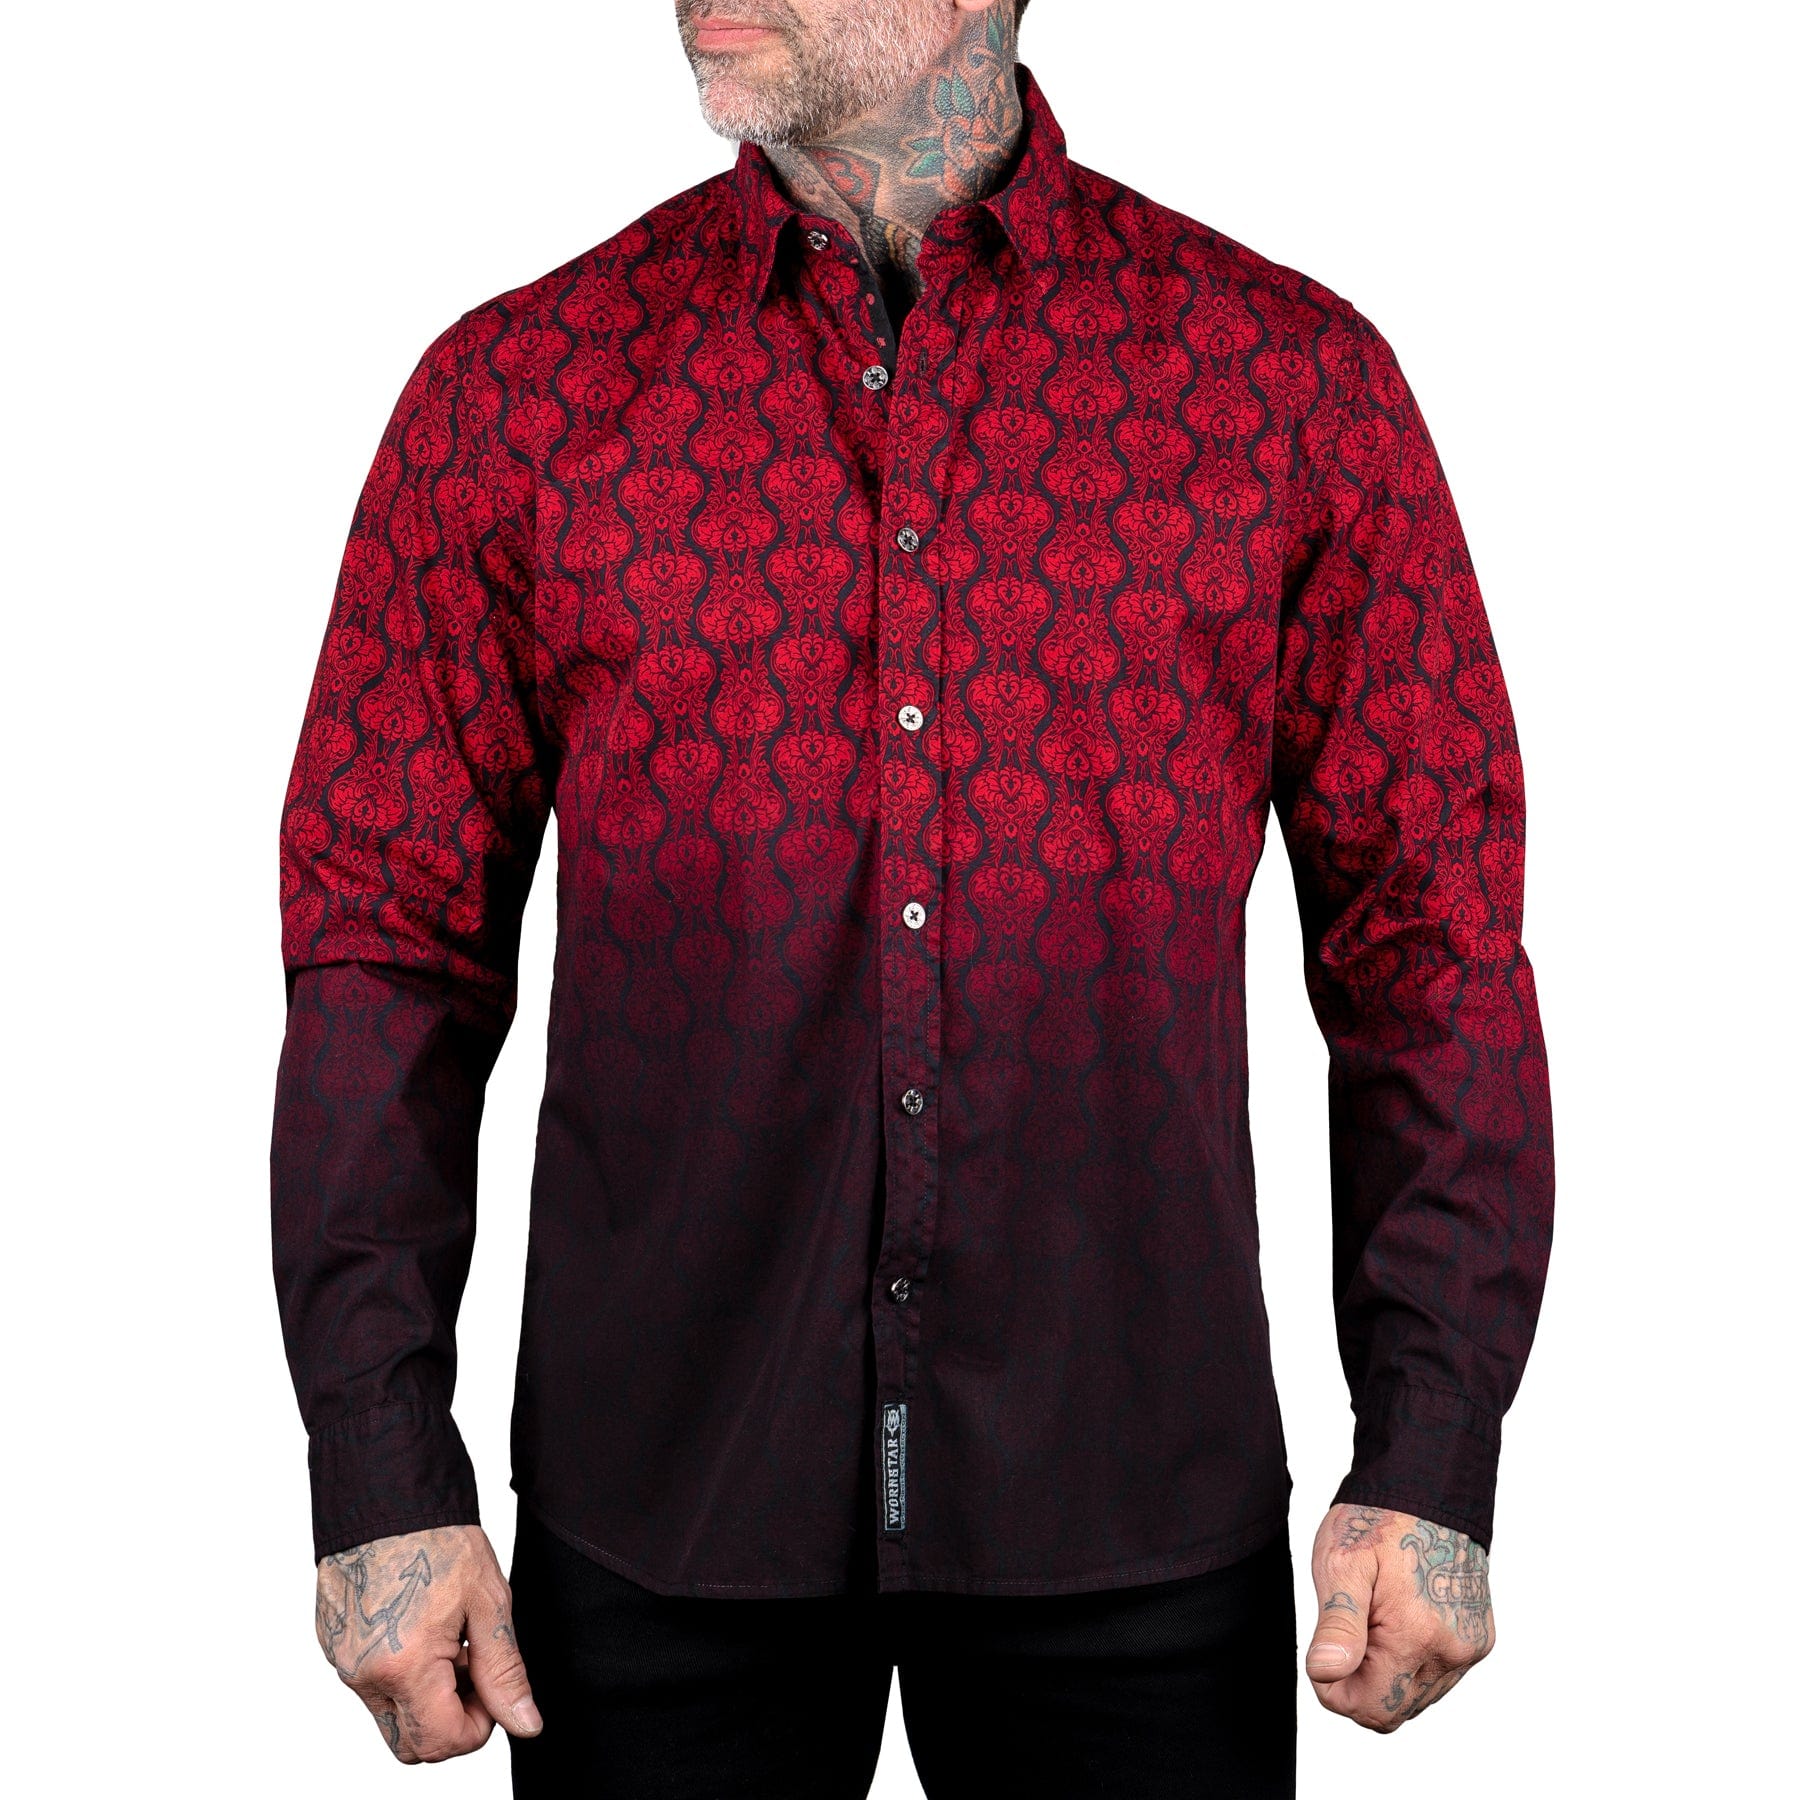 • Wornstar Rocknrolla Collection • Premium button-down long sleeve shirt • 100% Pre-washed cotton • Garment washed for superior soft, worn in feel • All over ruby on black printed pattern graphic • Black ombre dip dye • Skull and fleur graphic detail on inside cuffs and collar • Wornstar badge gun metal rivet on back collar • Skull crossed dagger gun metal buttons • Wornstar Rocknrolla Collection woven label on front